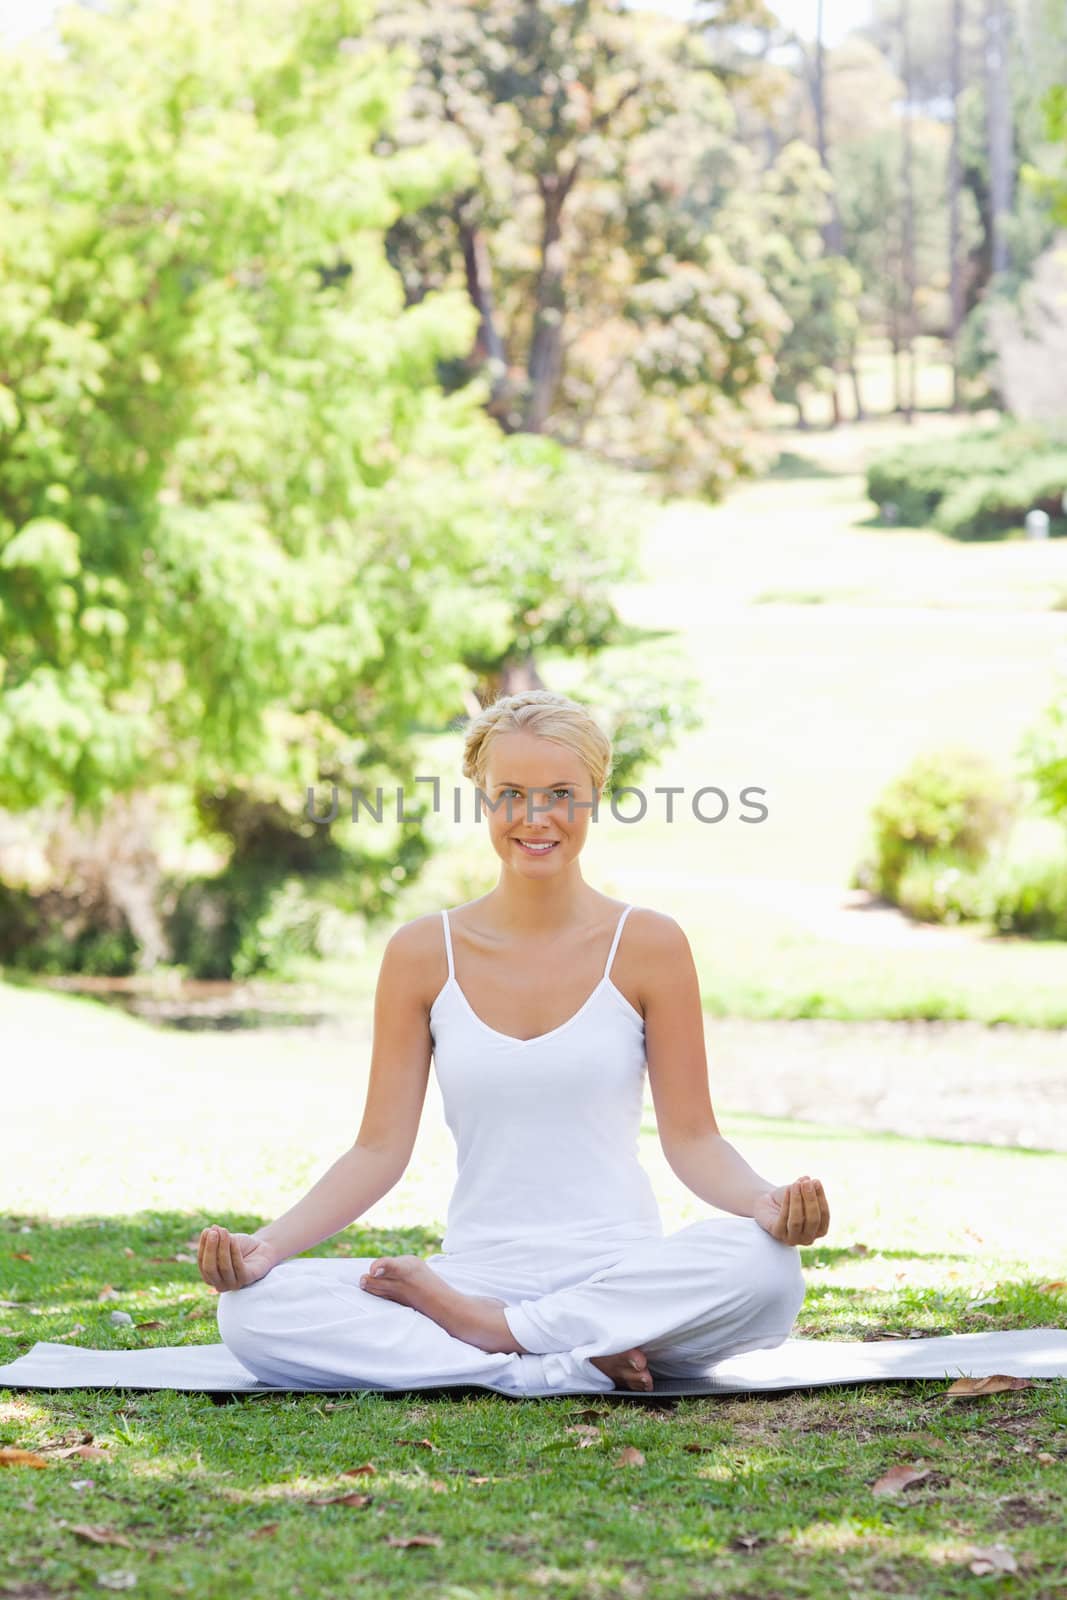 Smiling young woman sitting in a yoga position in the park